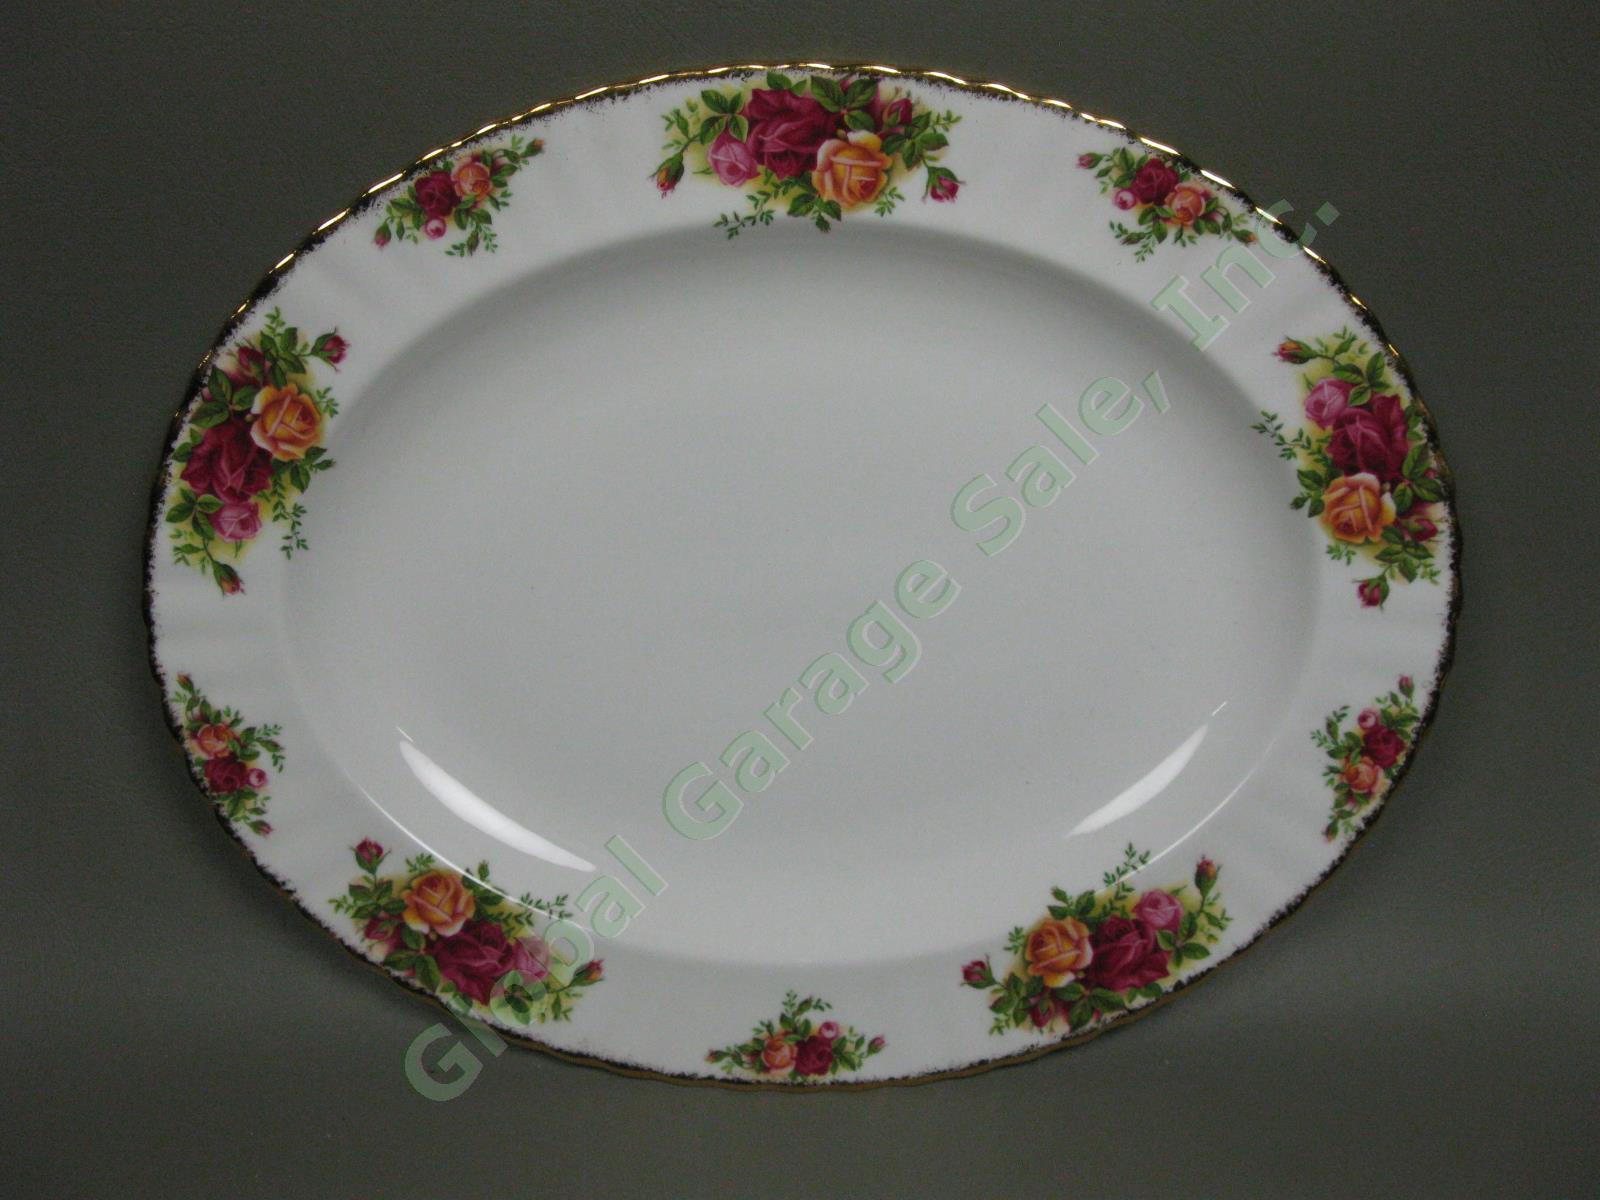 4 Royal Albert Old Country Roses Place Settings Serving Bowl Platter Plate Set 20